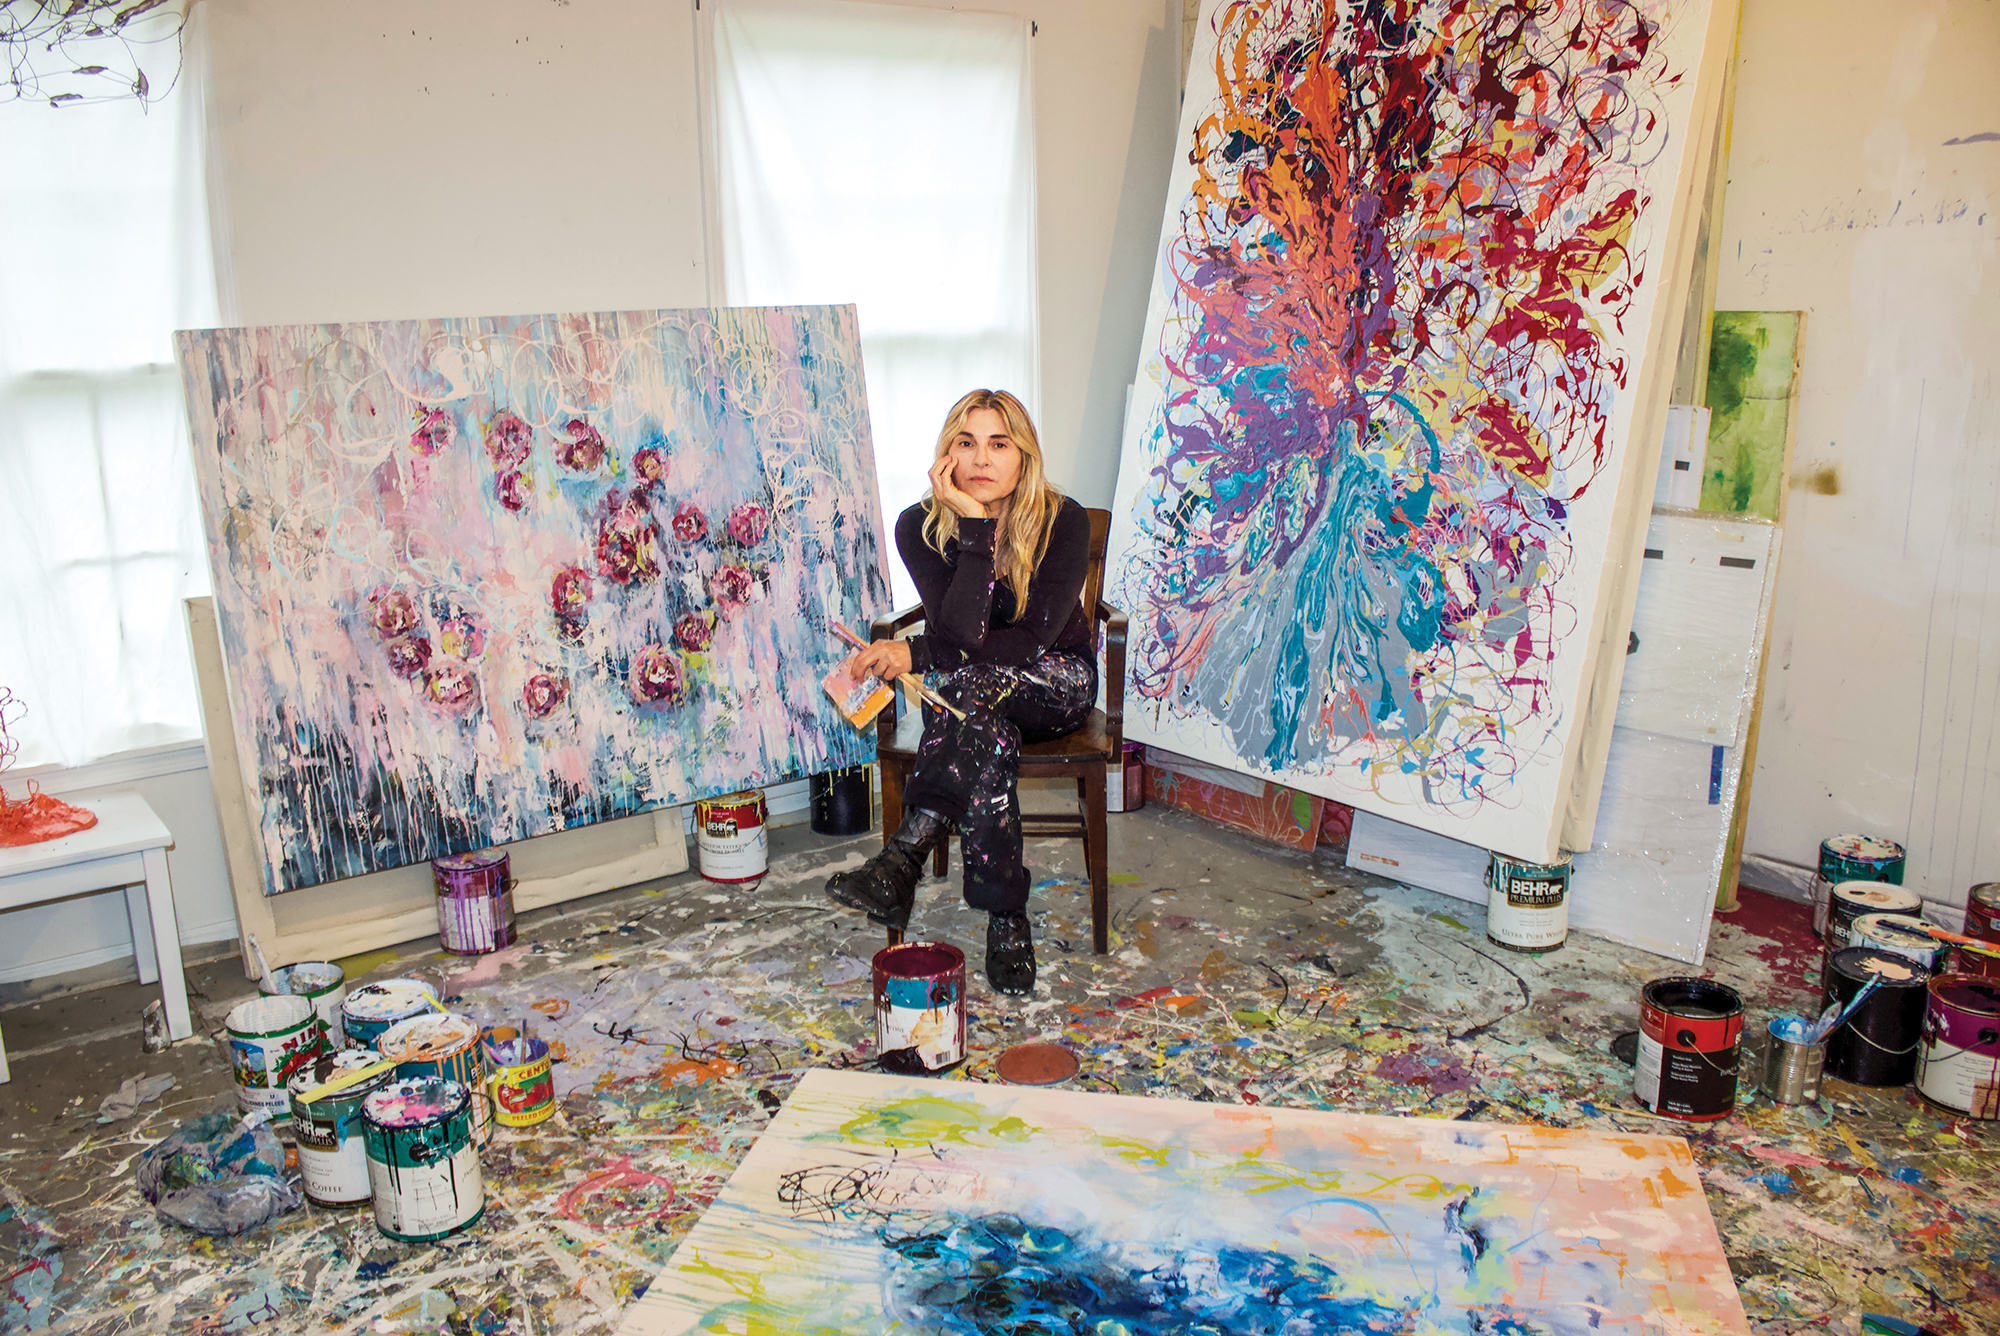 A female artist sits in her studio surrounded by her paintings and artwork.